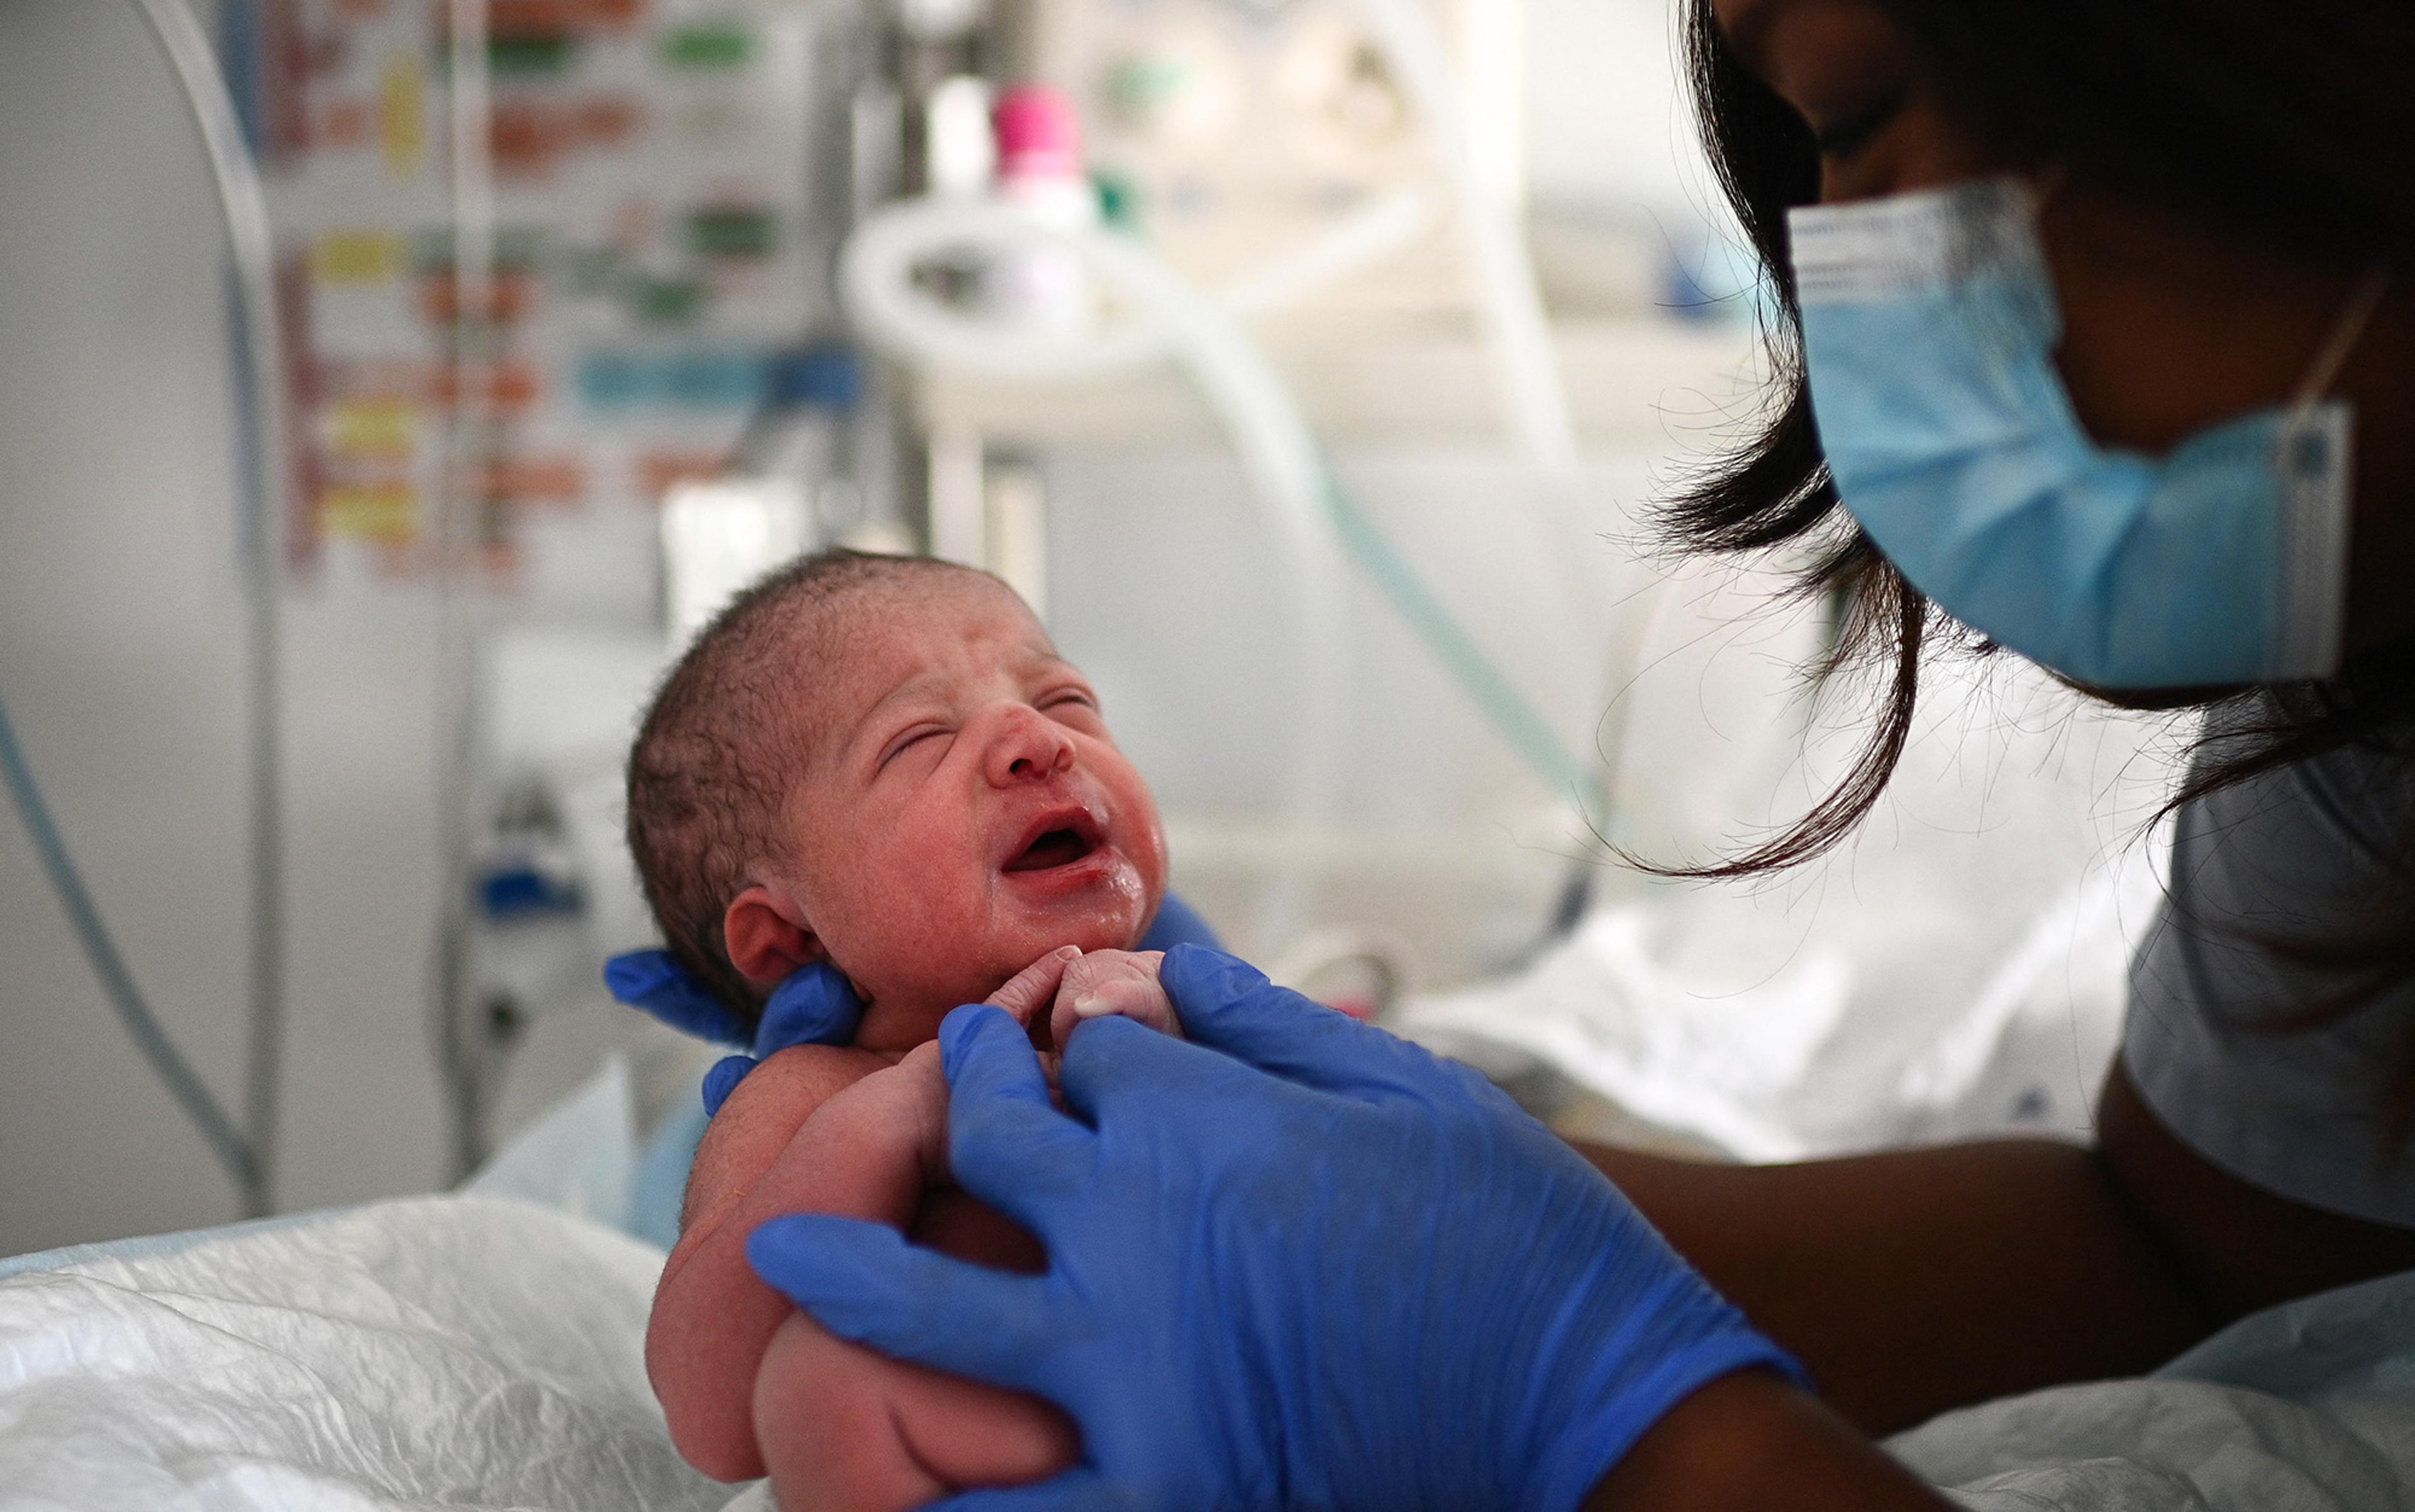 Newborn baby being held by a person wearing blue gloves, with another masked individual looking at the baby in a medical setting.